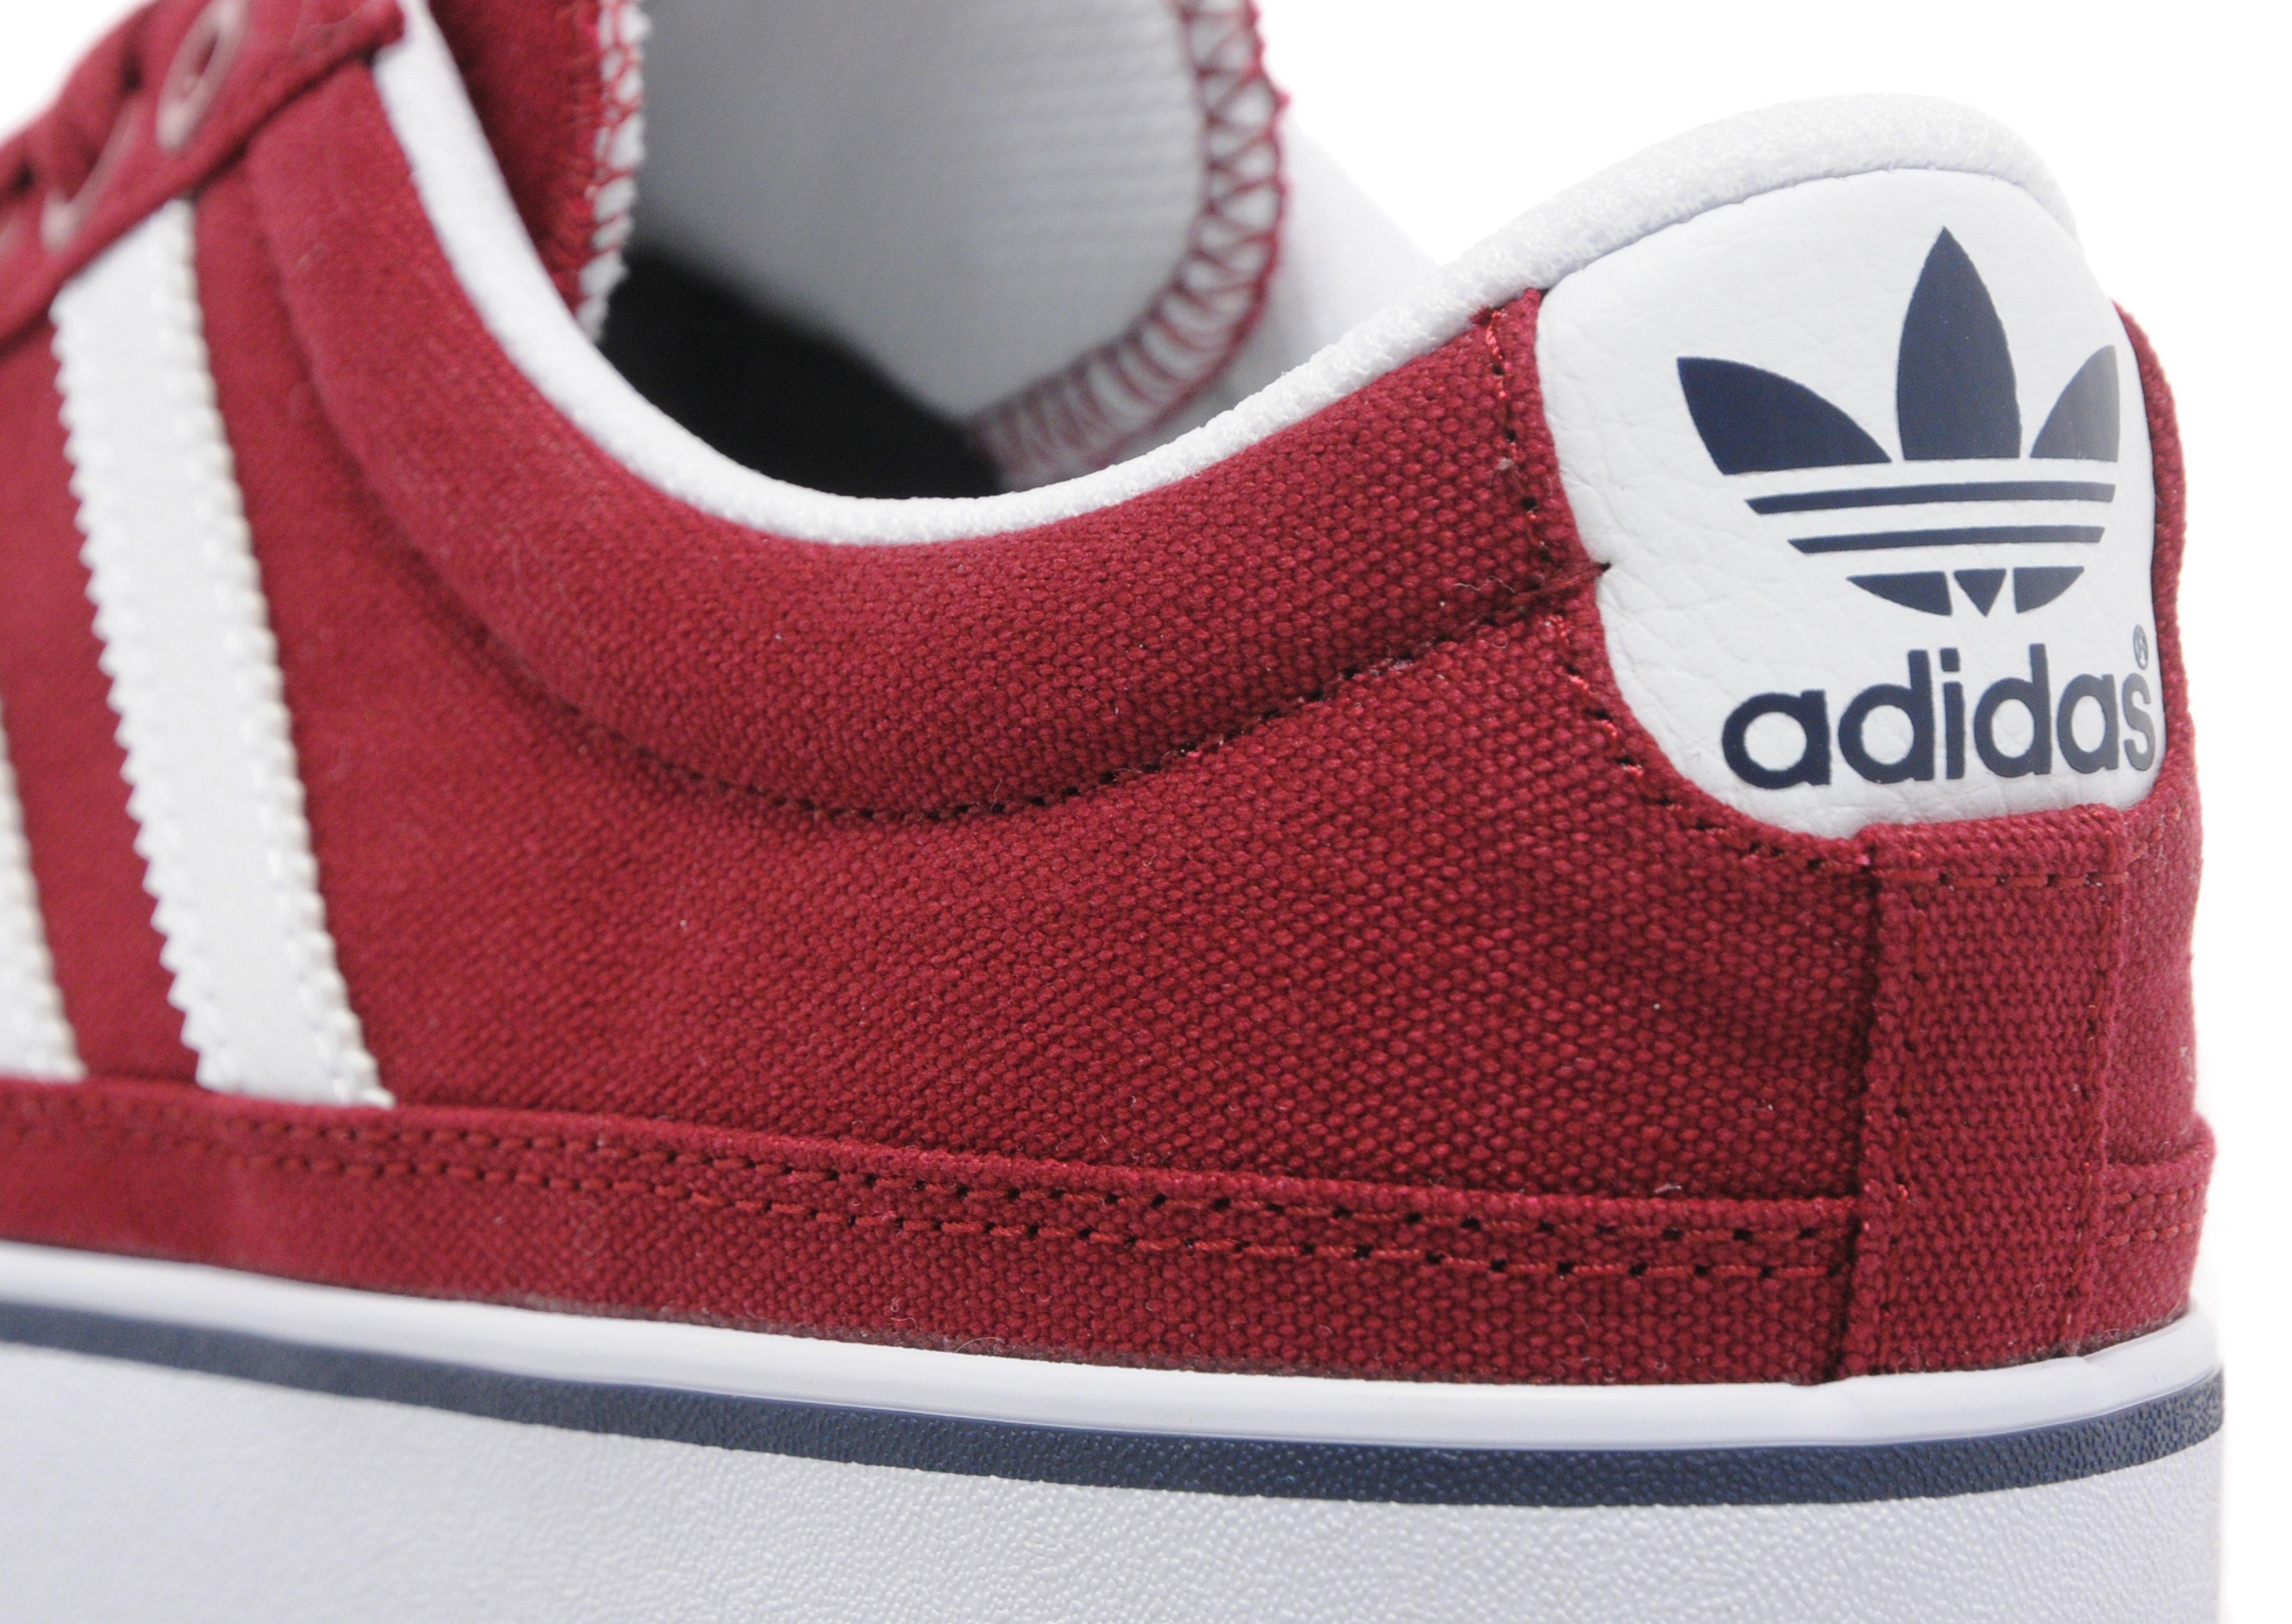 adidas Originals Canvas Rayado Lo in Red/White (Red) for Men - Lyst